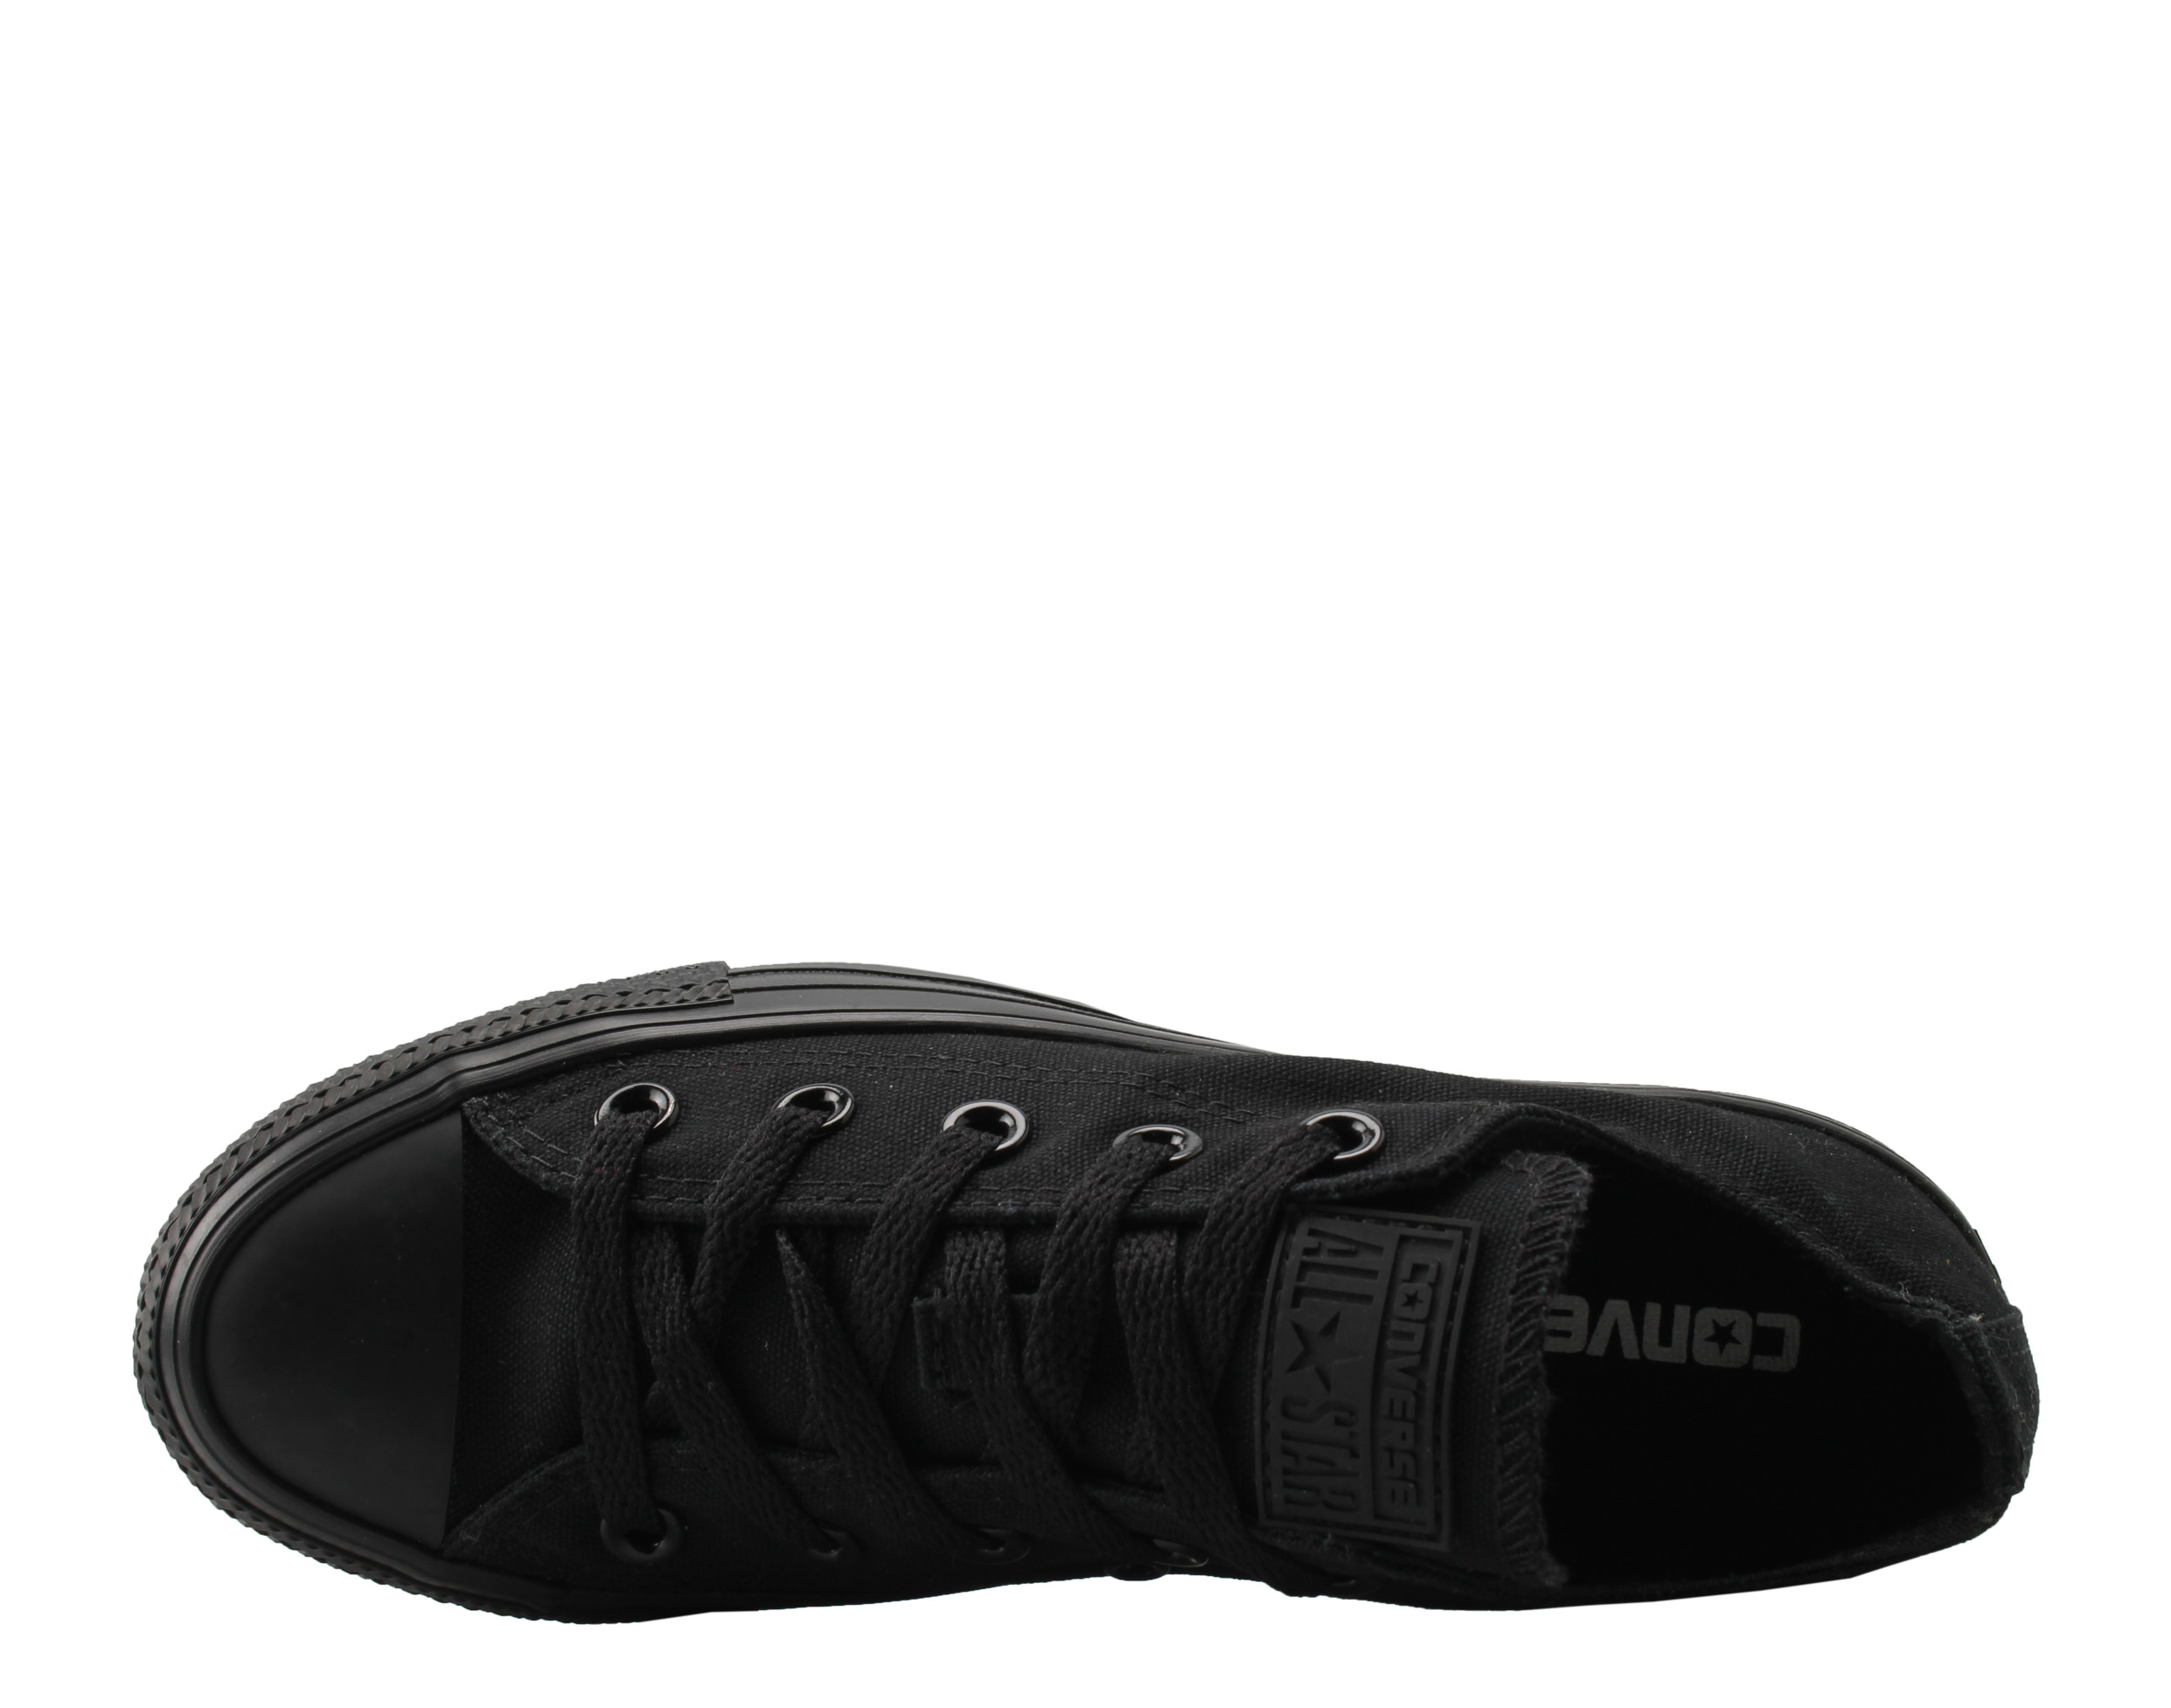 Converse Unisex Chuck Taylor All Star Low Top - image 4 of 6